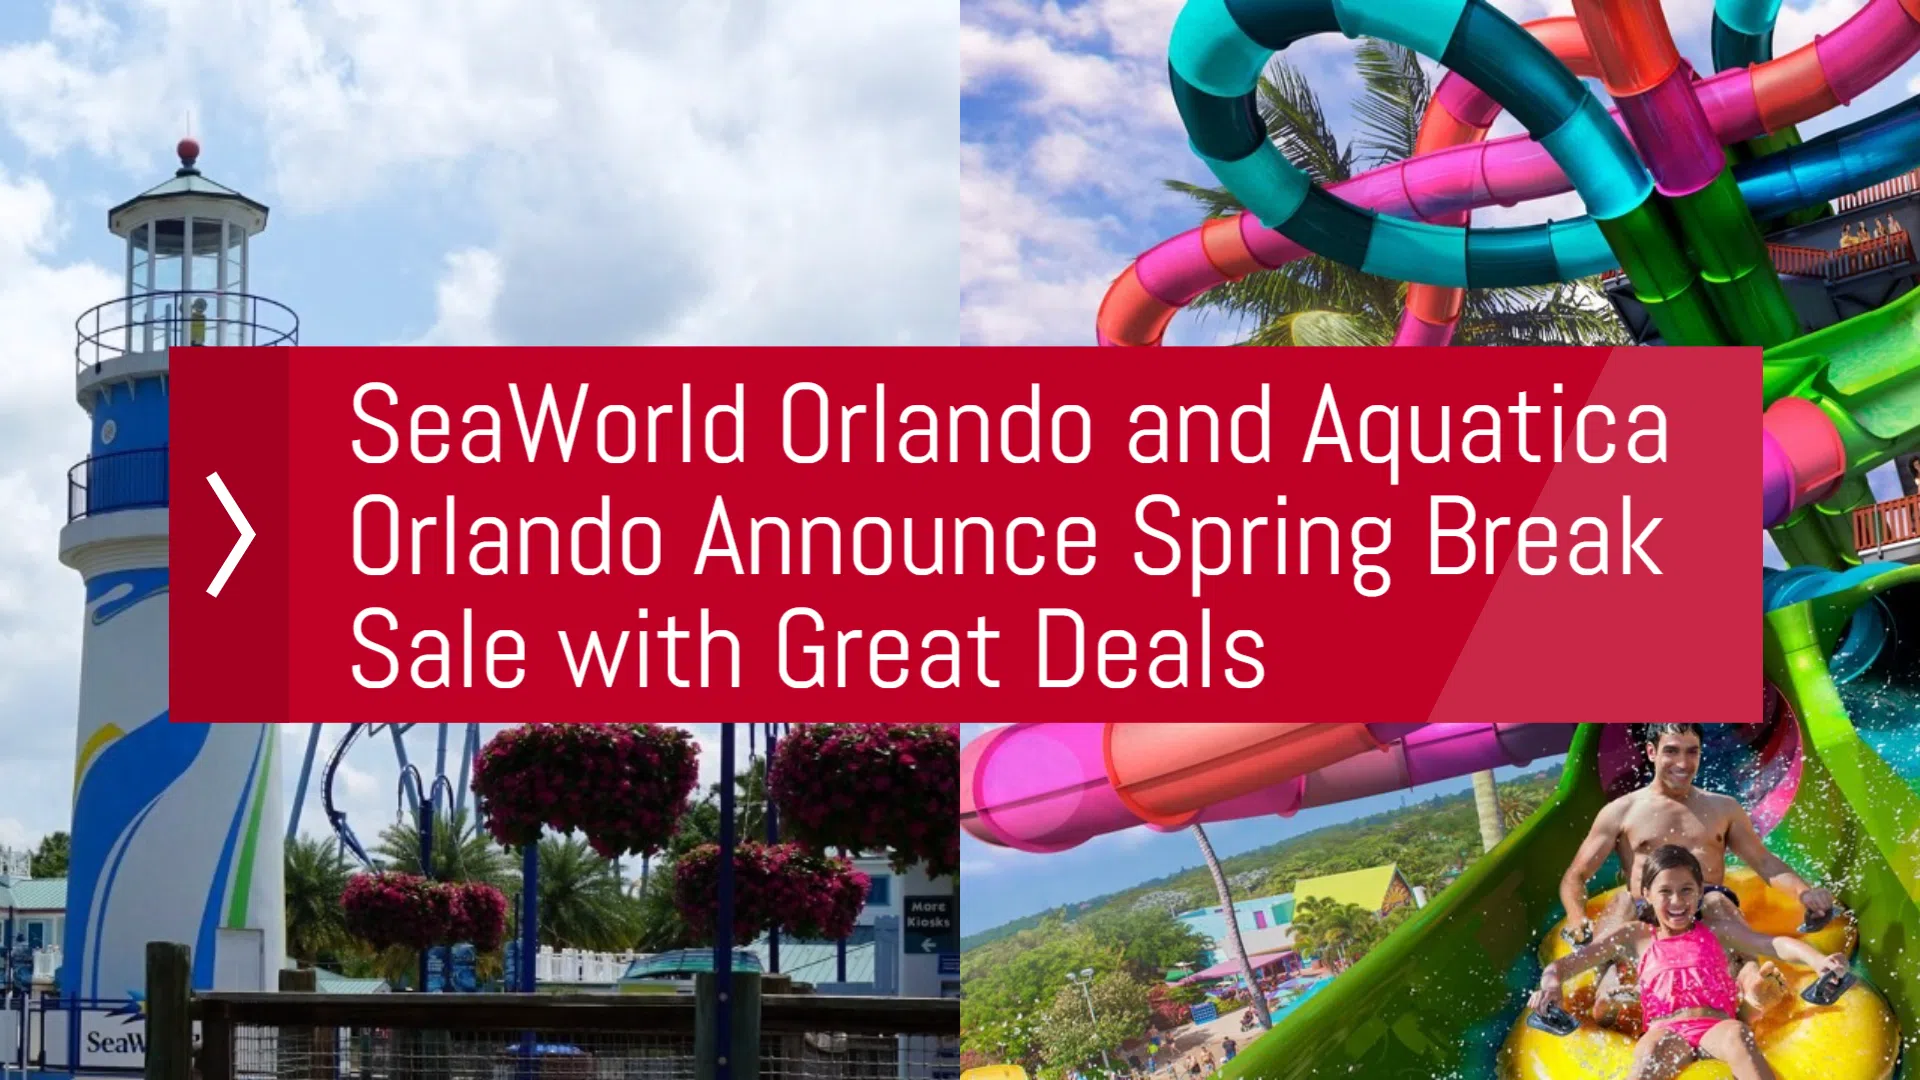 Spring Break Sale and great deals